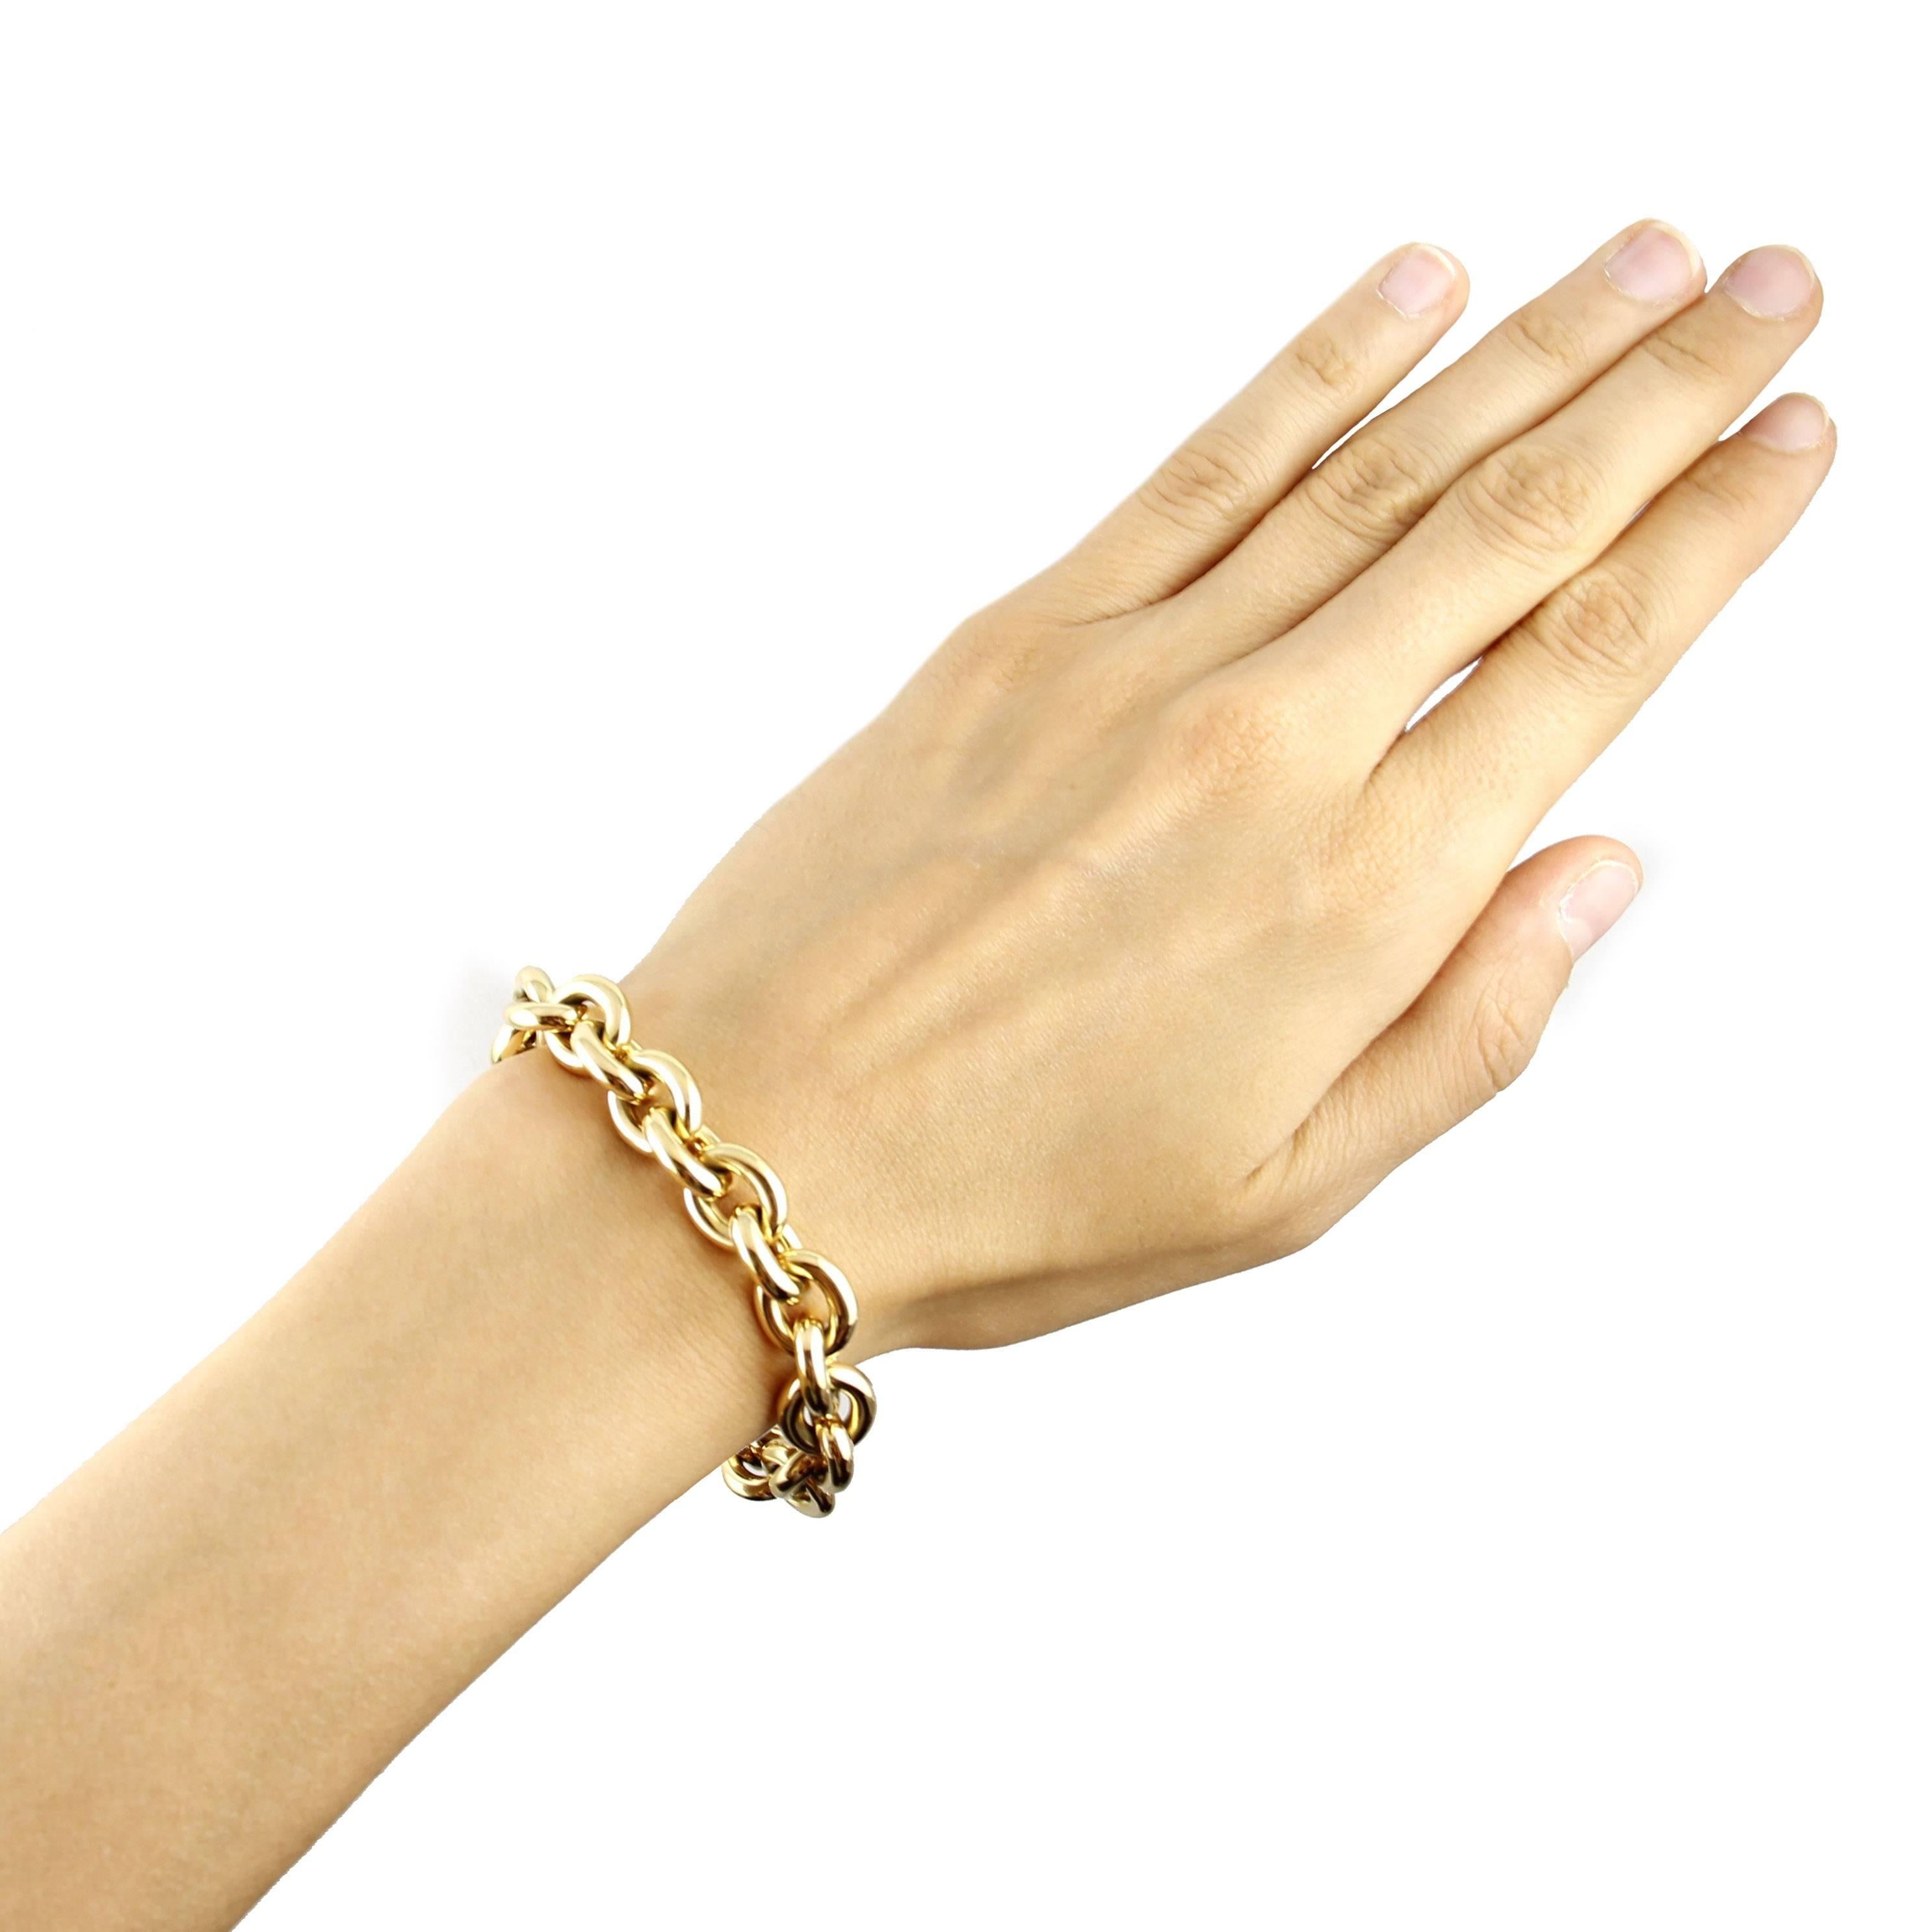 Jona design collection, hand crafted in Italy, 18 karat yellow gold chain bracelet 20 cm. - 7.87 in. long. Total weight 44.5 grams.
All Jona jewelry is new and has never been previously owned or worn. Each item will arrive at your door beautifully